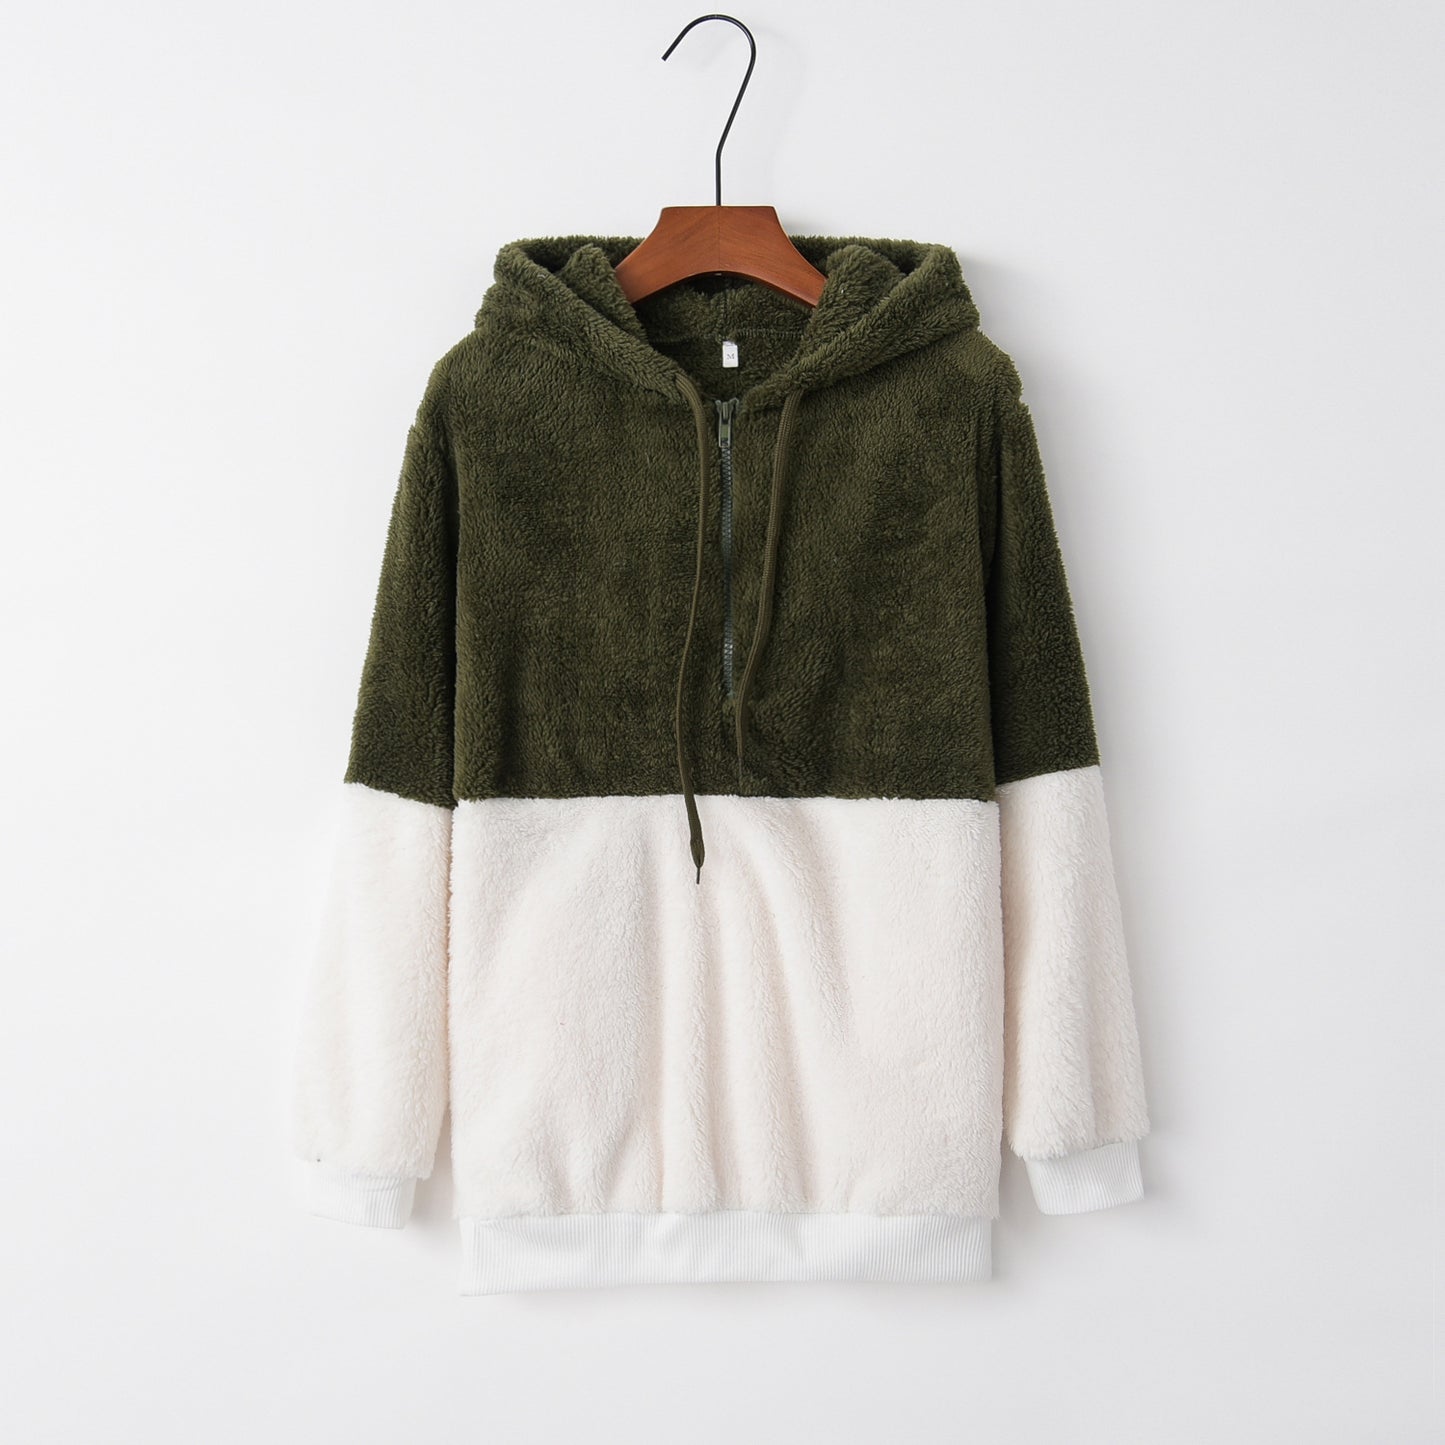 Solid Color Women's Long-Sleeved Hooded Sweater Coat